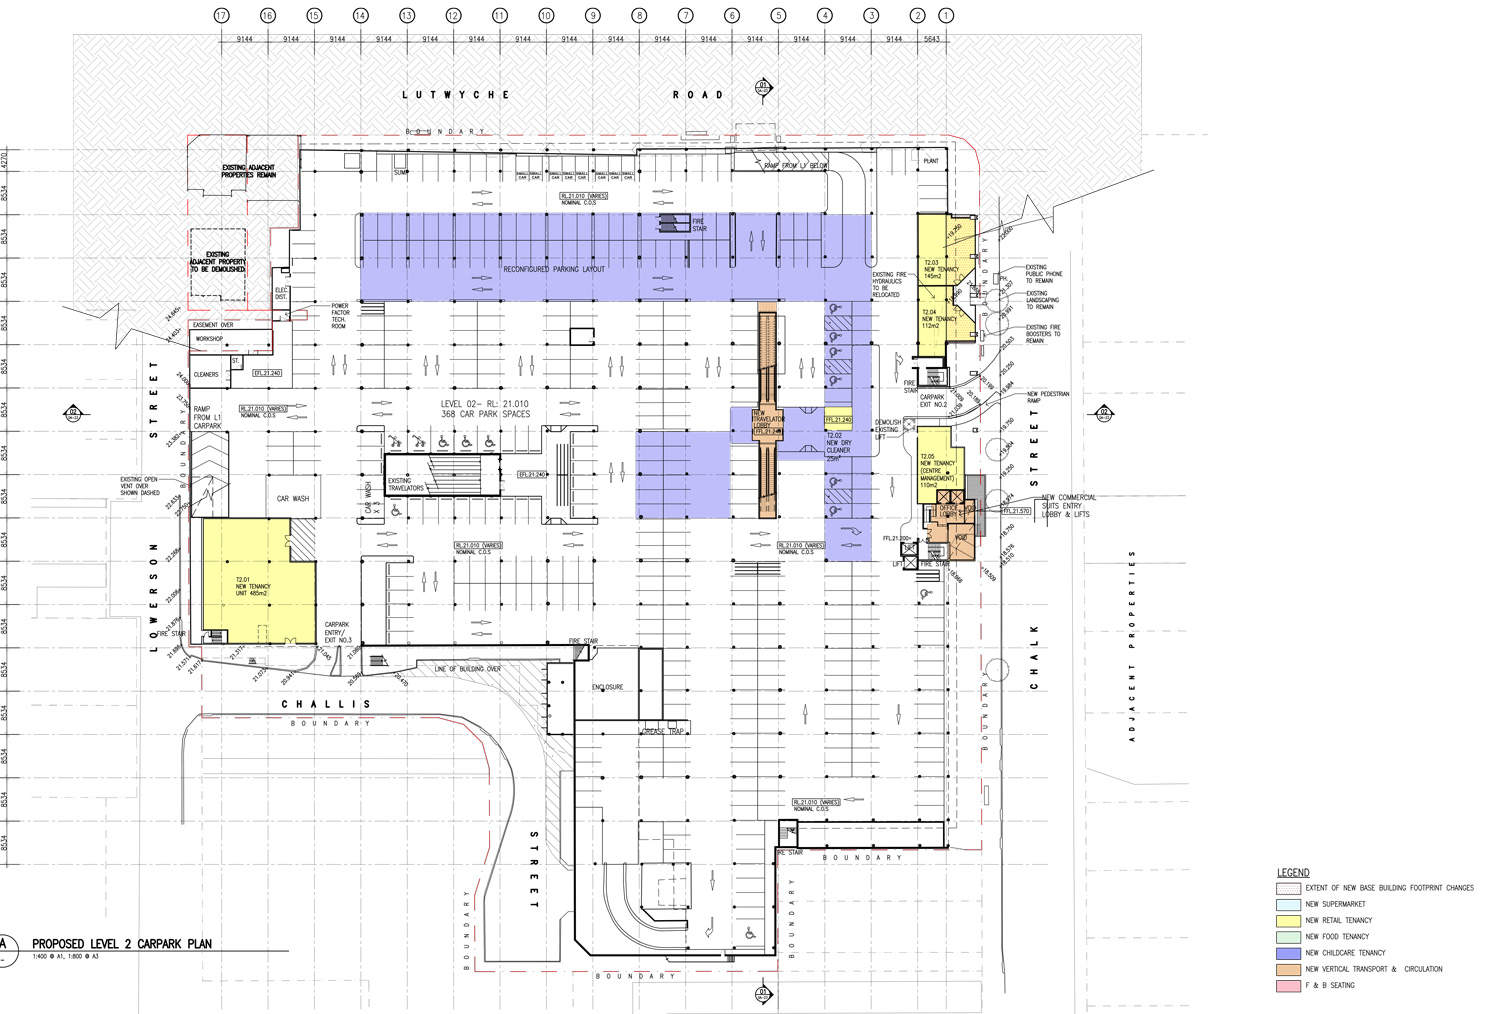 Level 2 plan - Lutwyche City Shopping Center